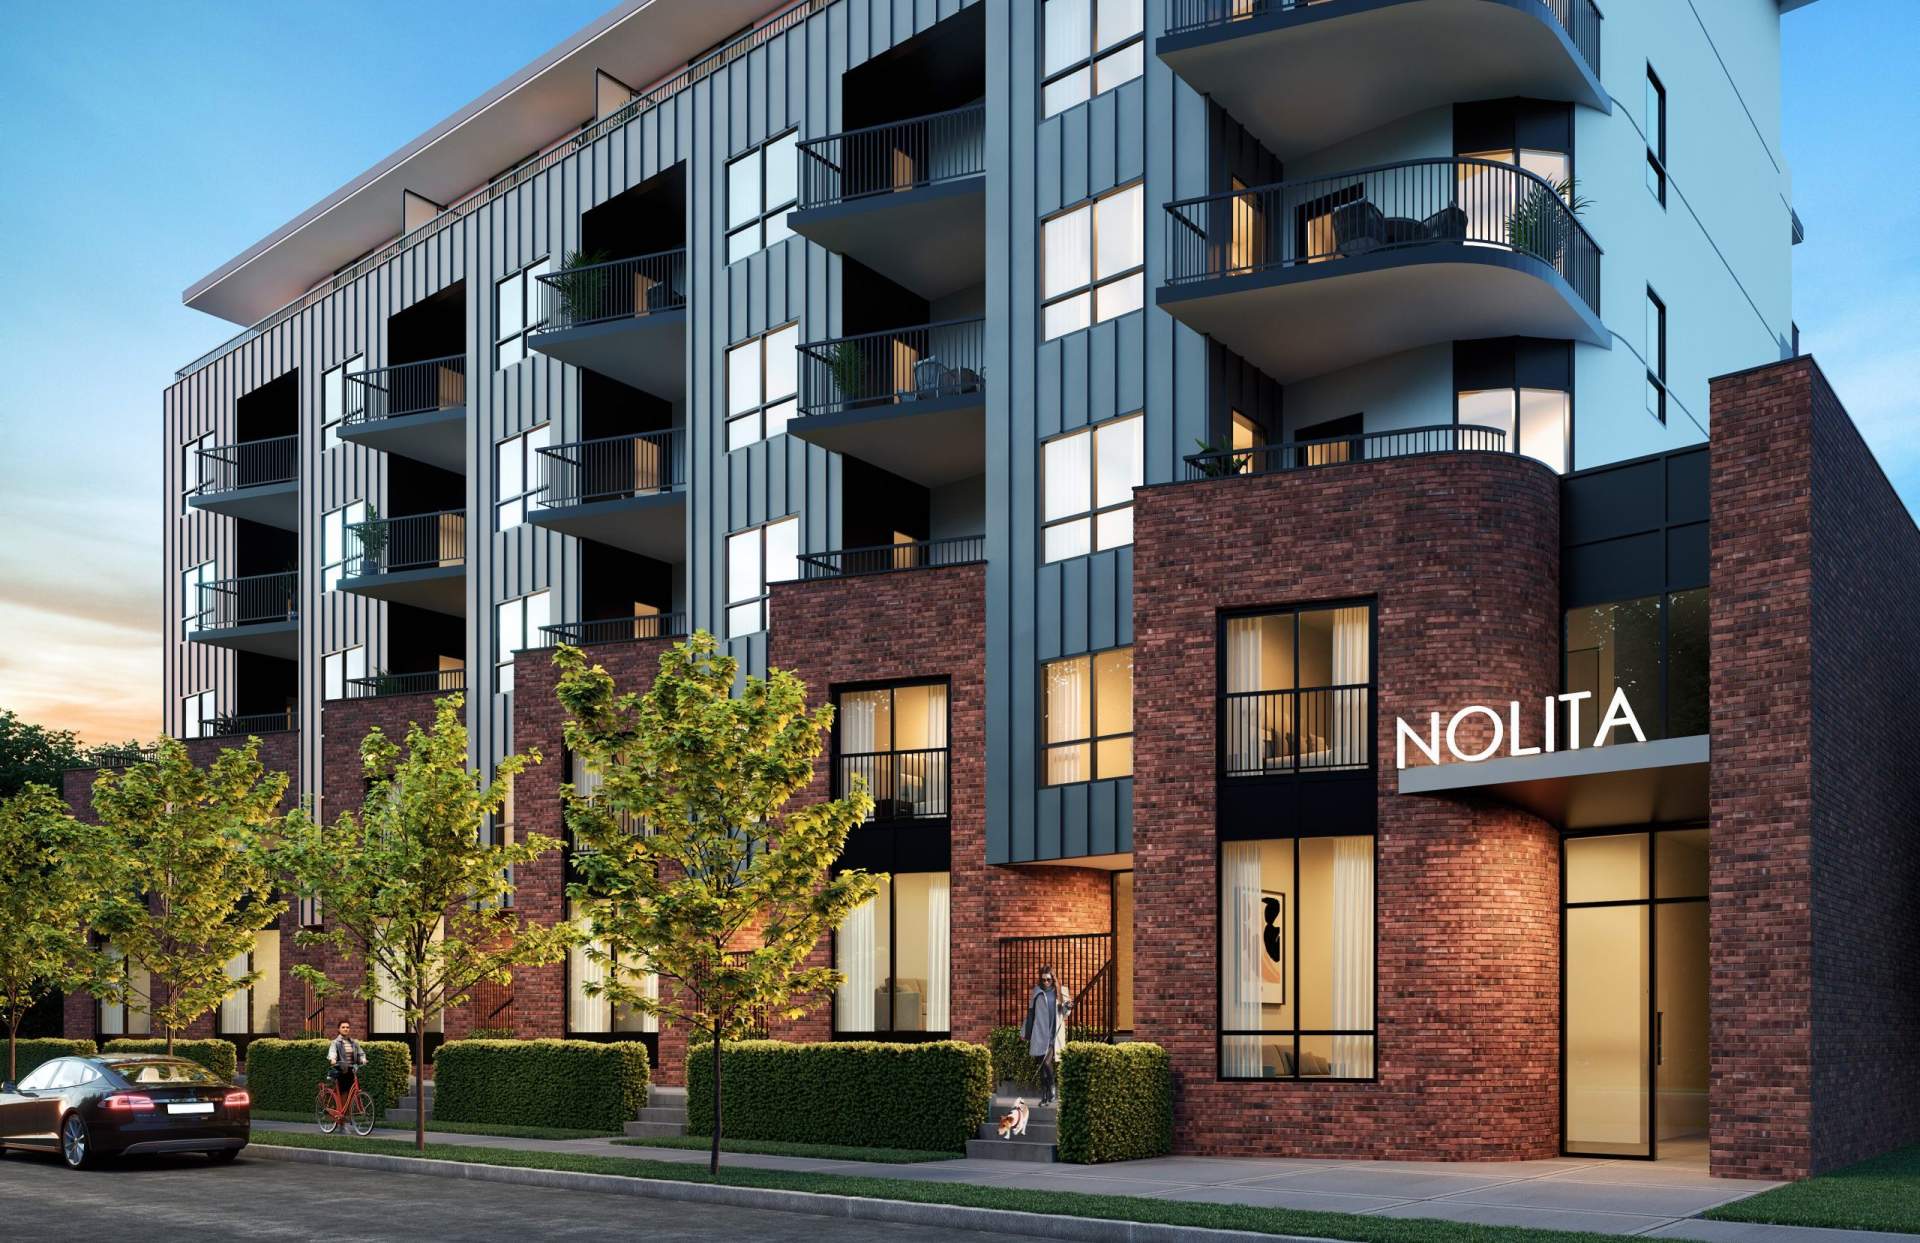 Nolita Kelowna - A collection of 55 Kelowna condominiums and 5 townhomes in a woodframe mid-rise.